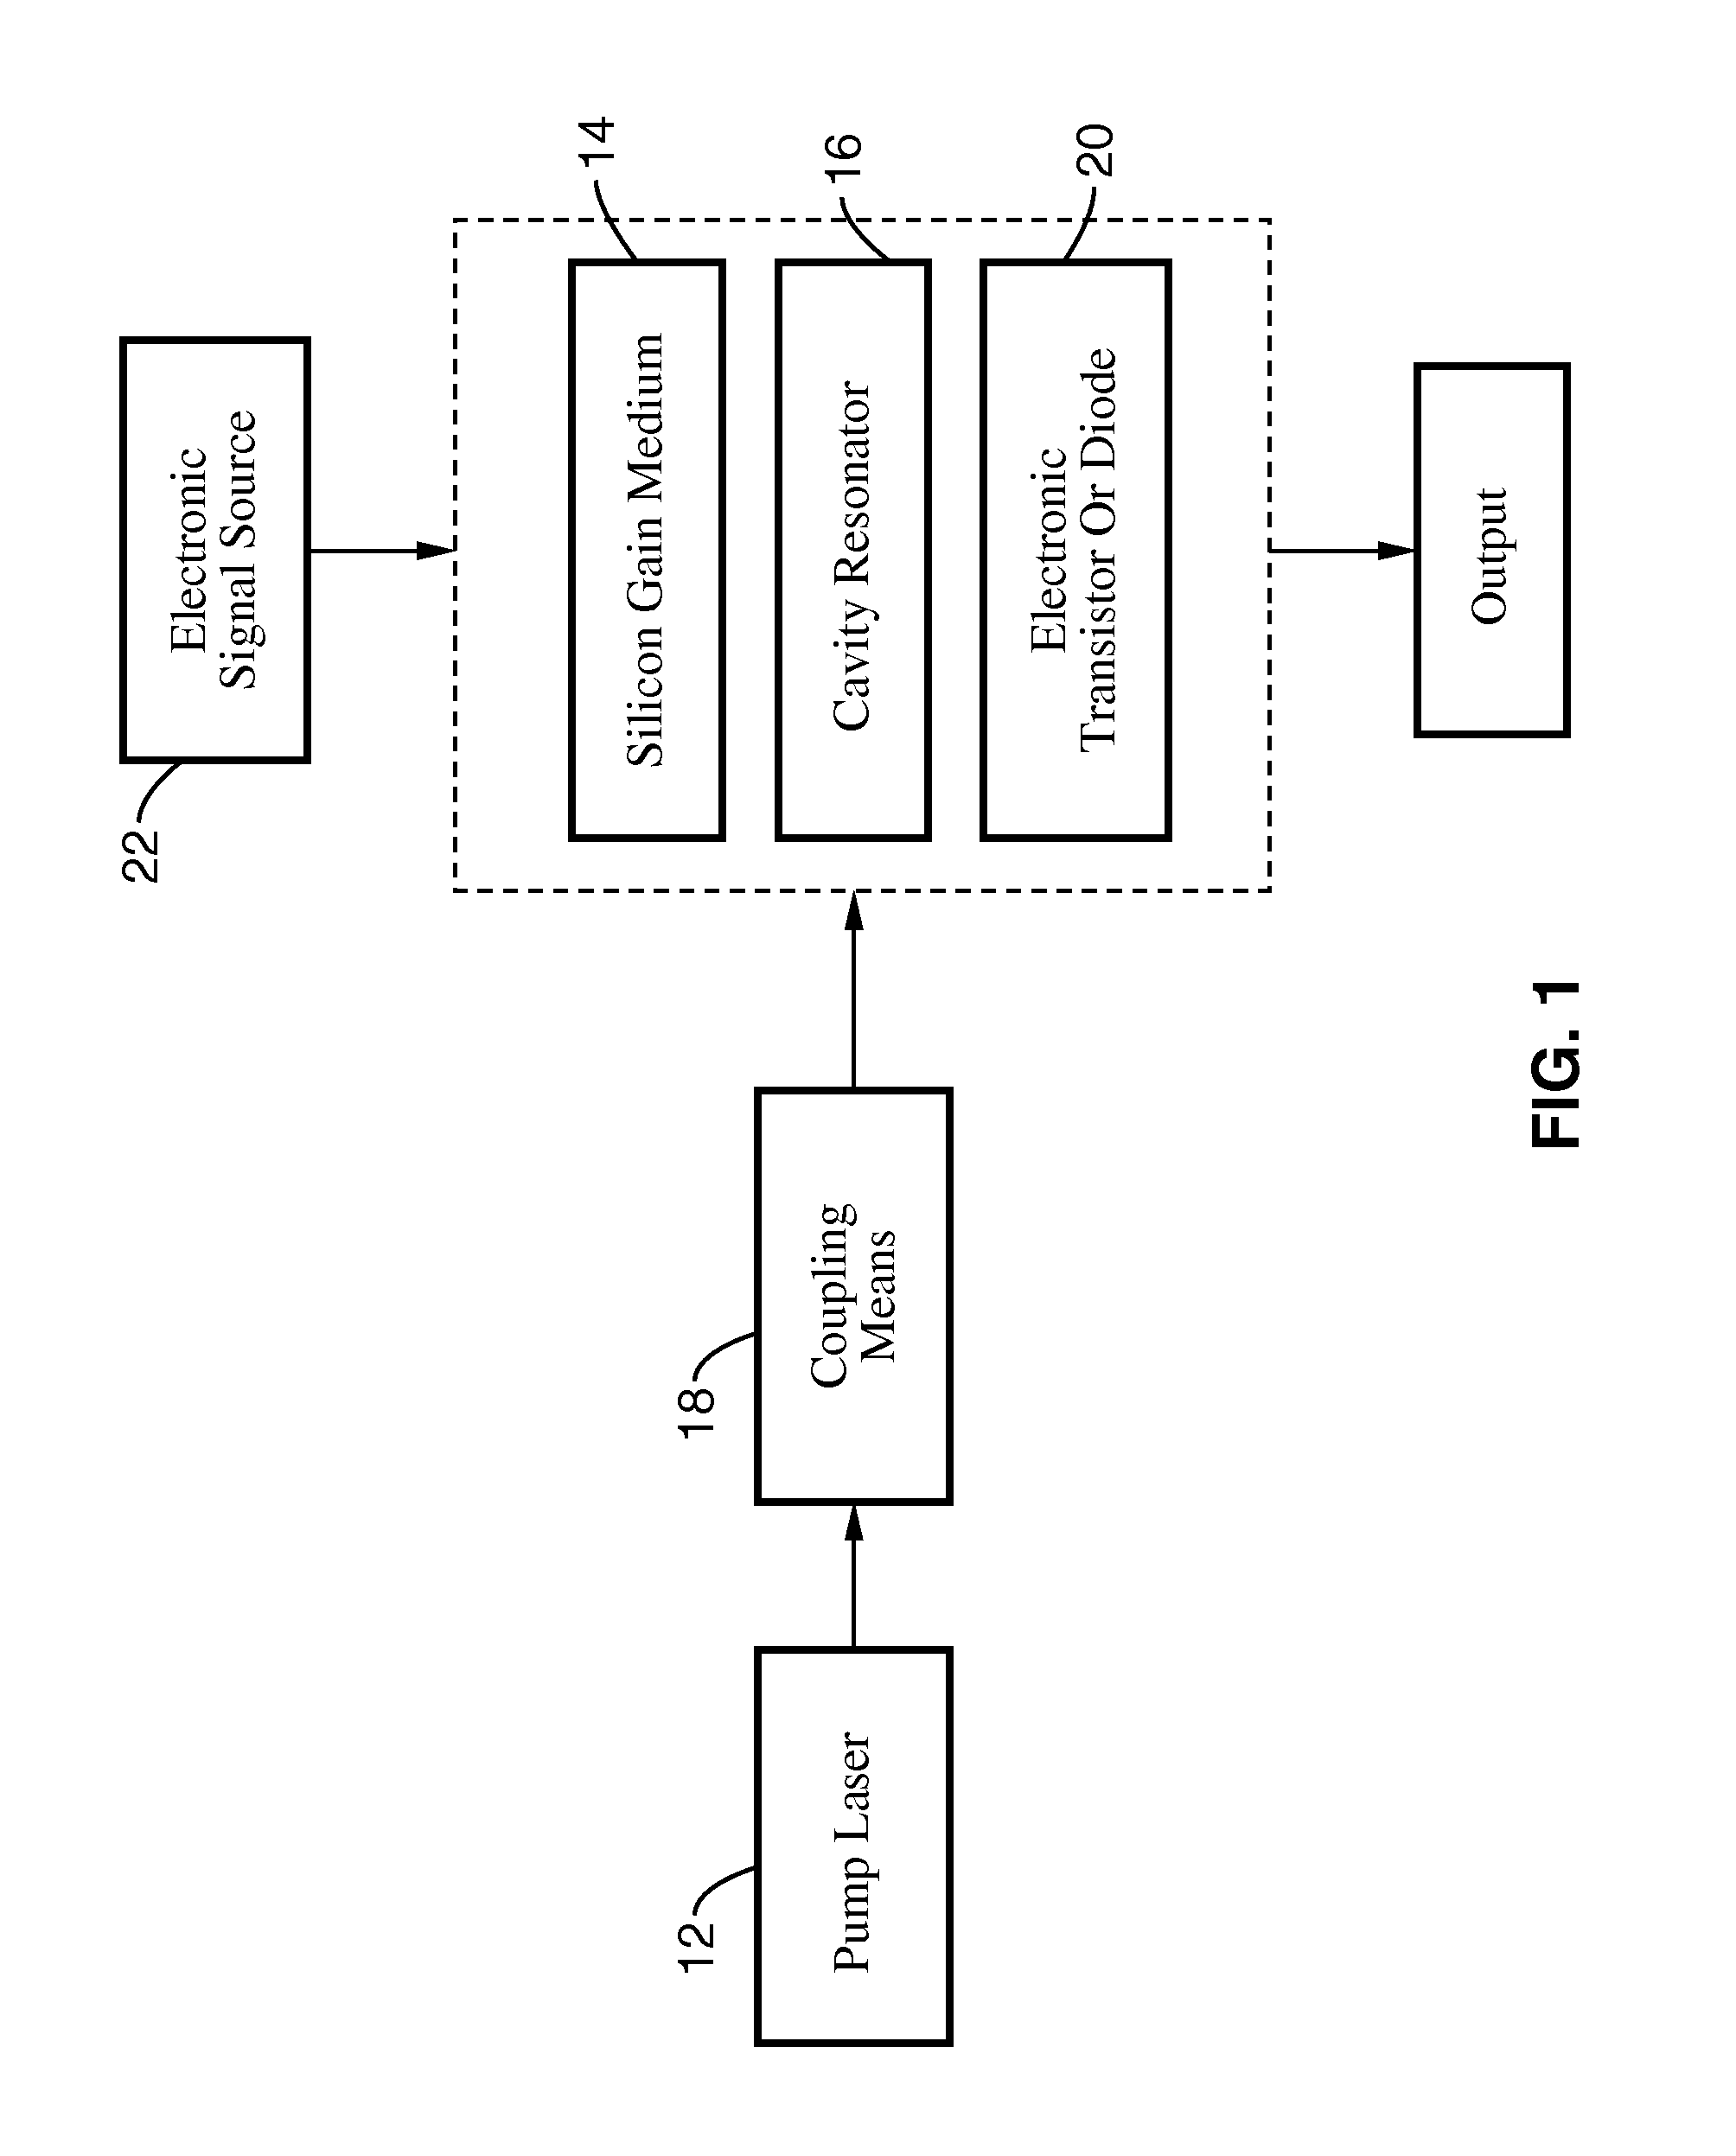 Cascaded cavity silicon raman laser with electrical modulation, switching, and active mode locking capability